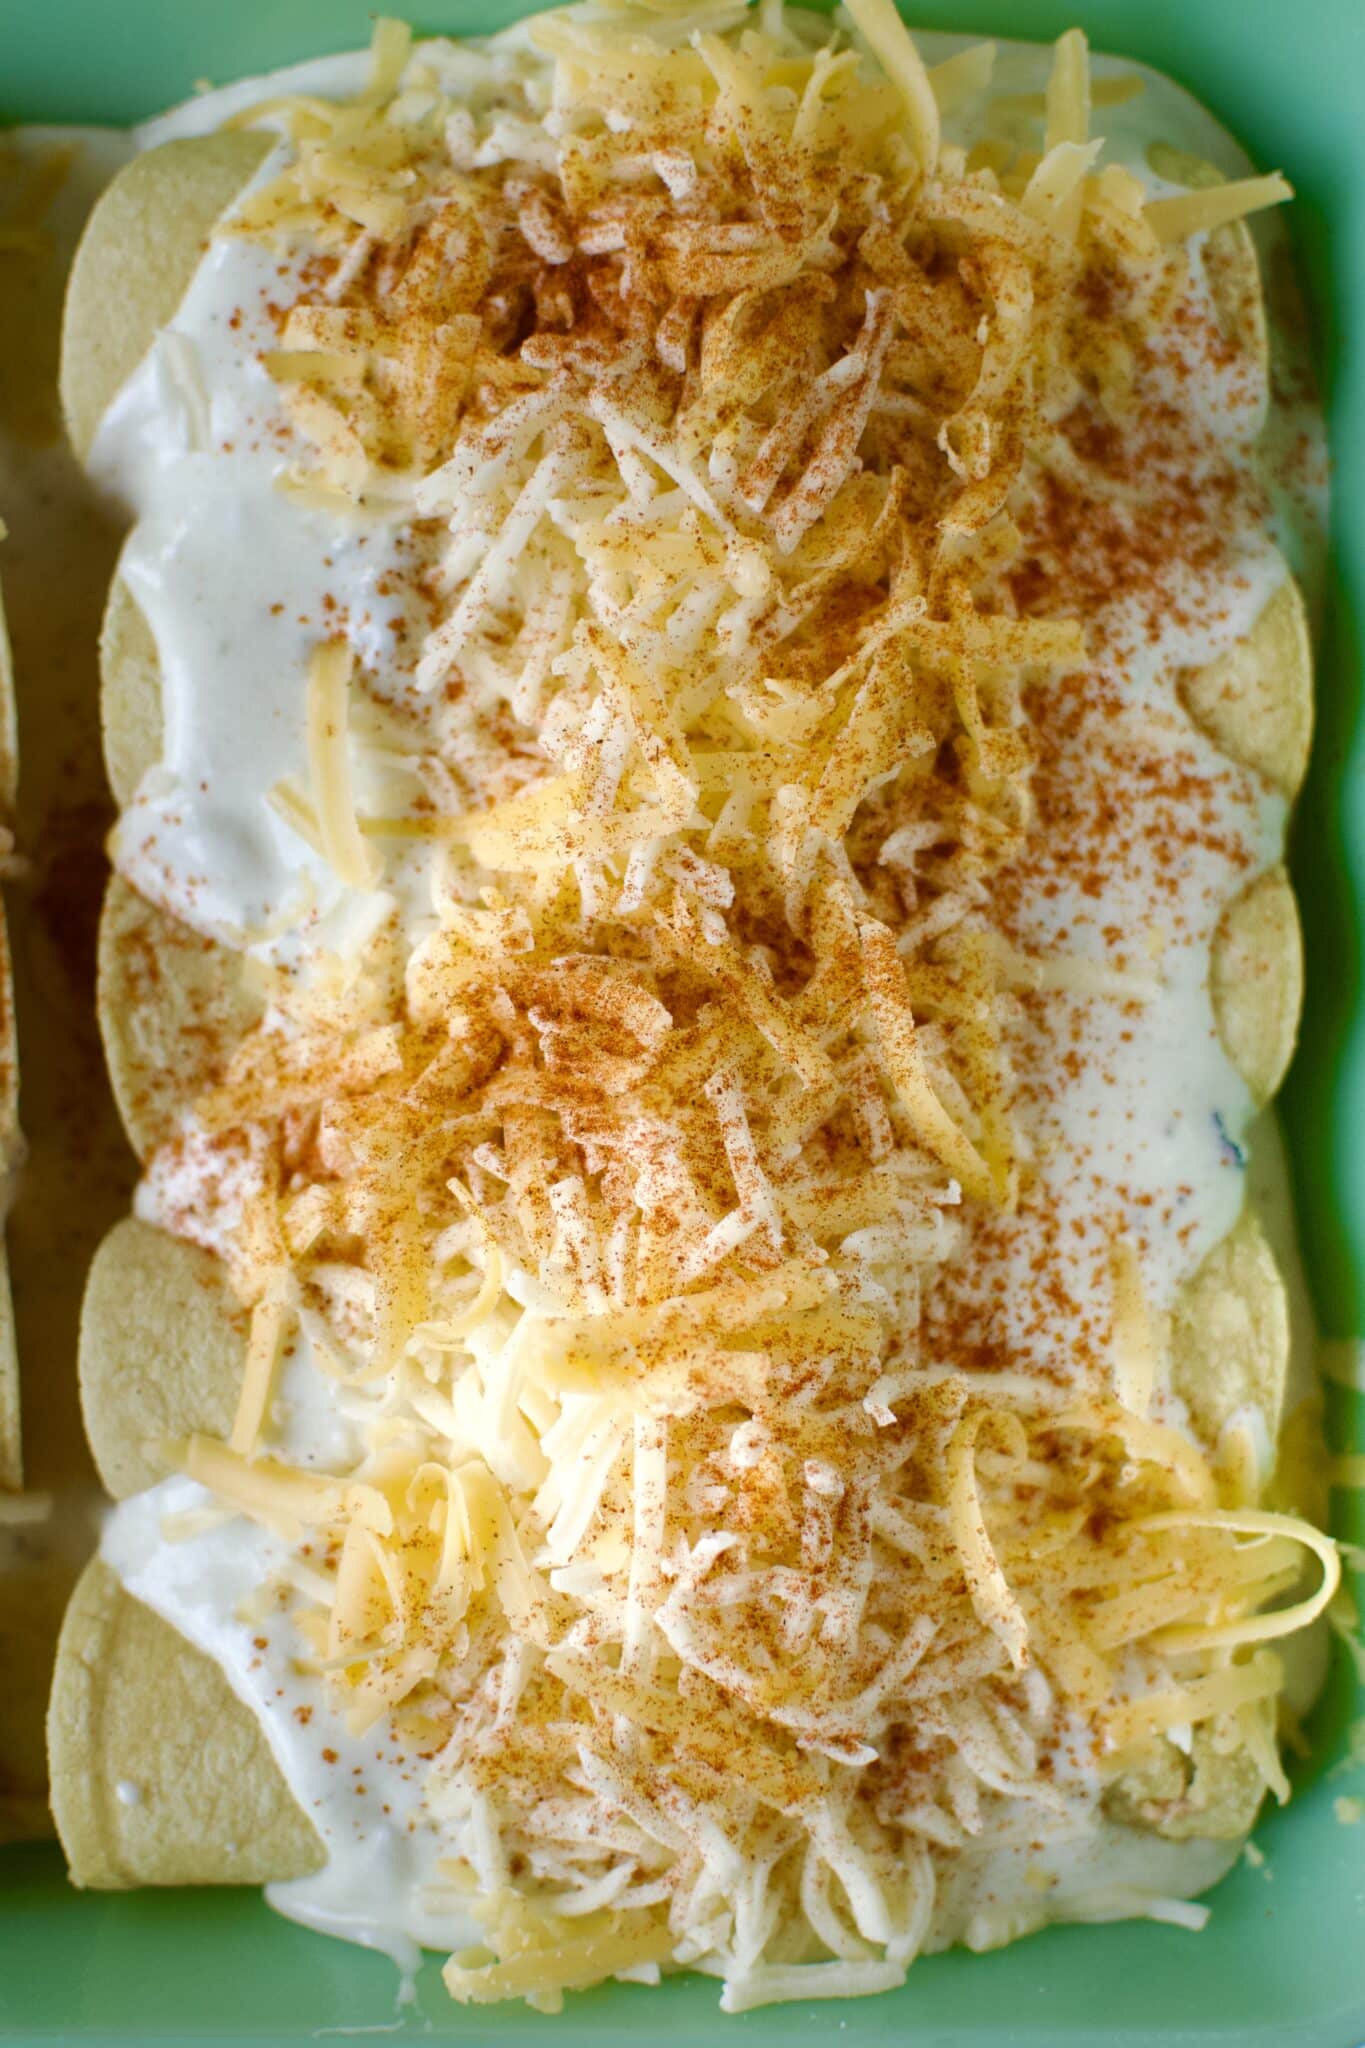 Chicken filled tortillas rolled up and placed in a baking dish that has been lined with sour cream enchilada sauce. Then topped with more sauce and cheese before baking.